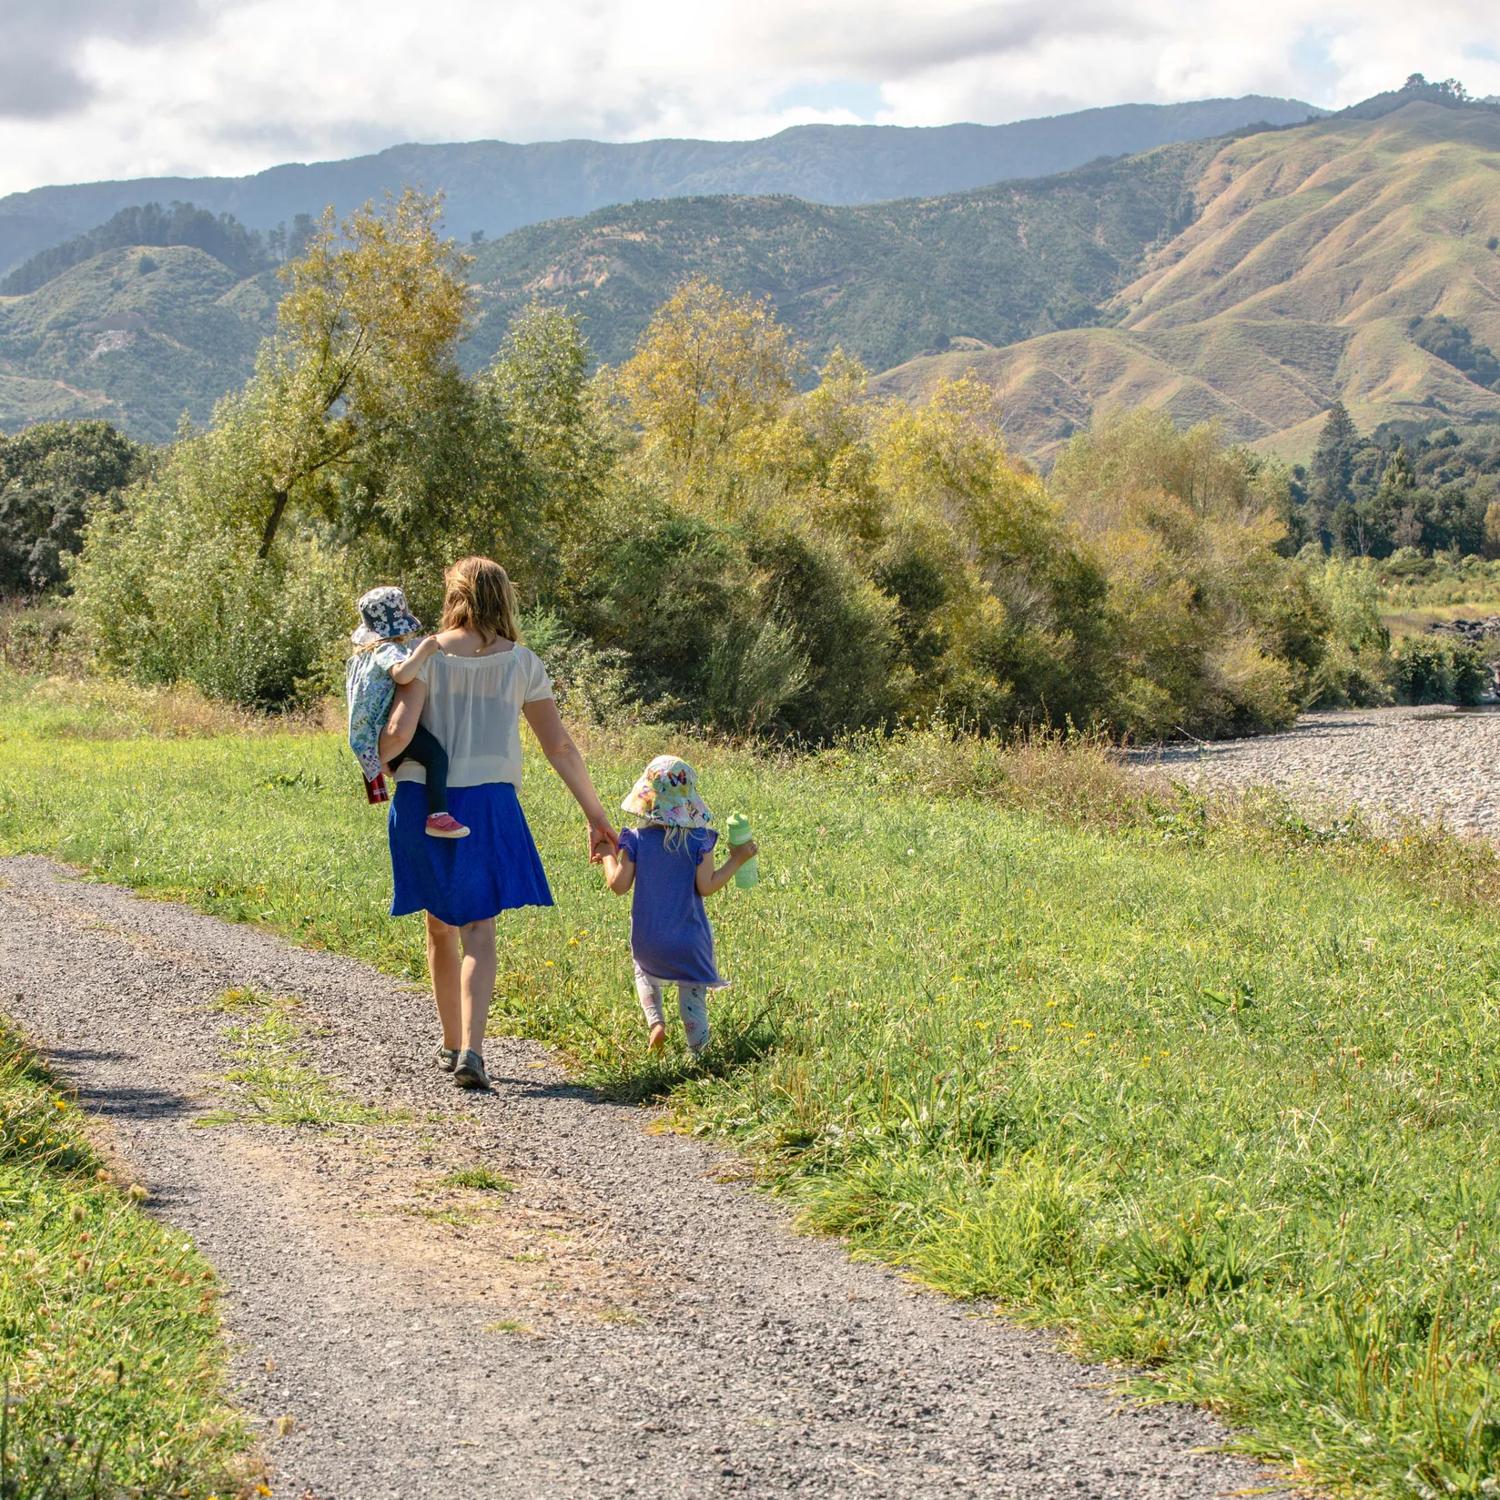 An adult and two children walk along a path in a lush valley with mountains in the background.